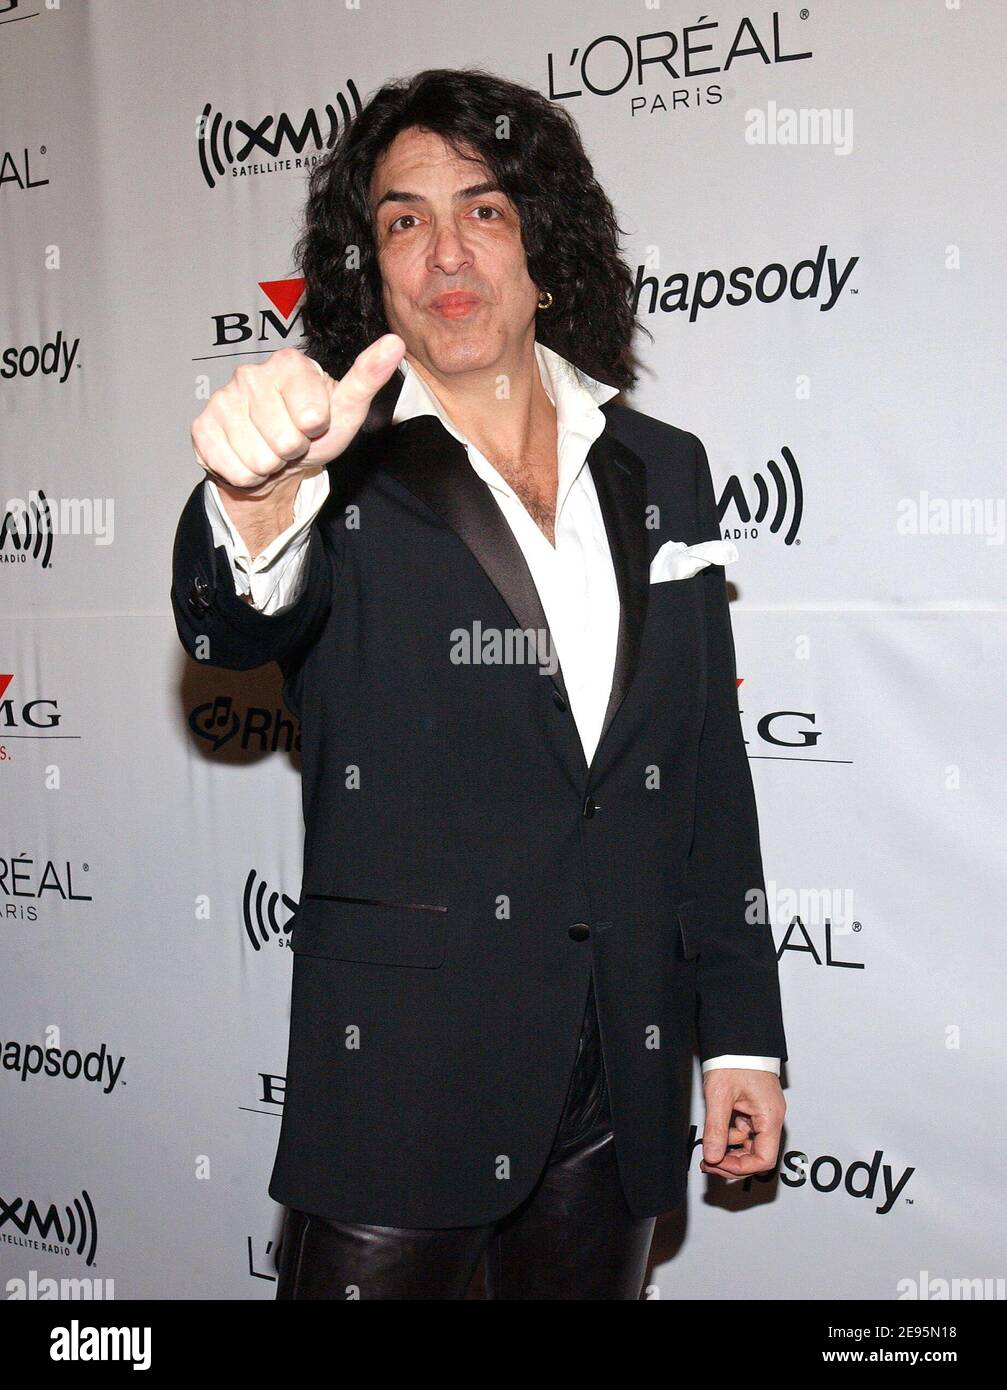 Paul Stanley of Kiss attends the 2006 Clive Davis Pre-GRAMMY Awards Party  held at the